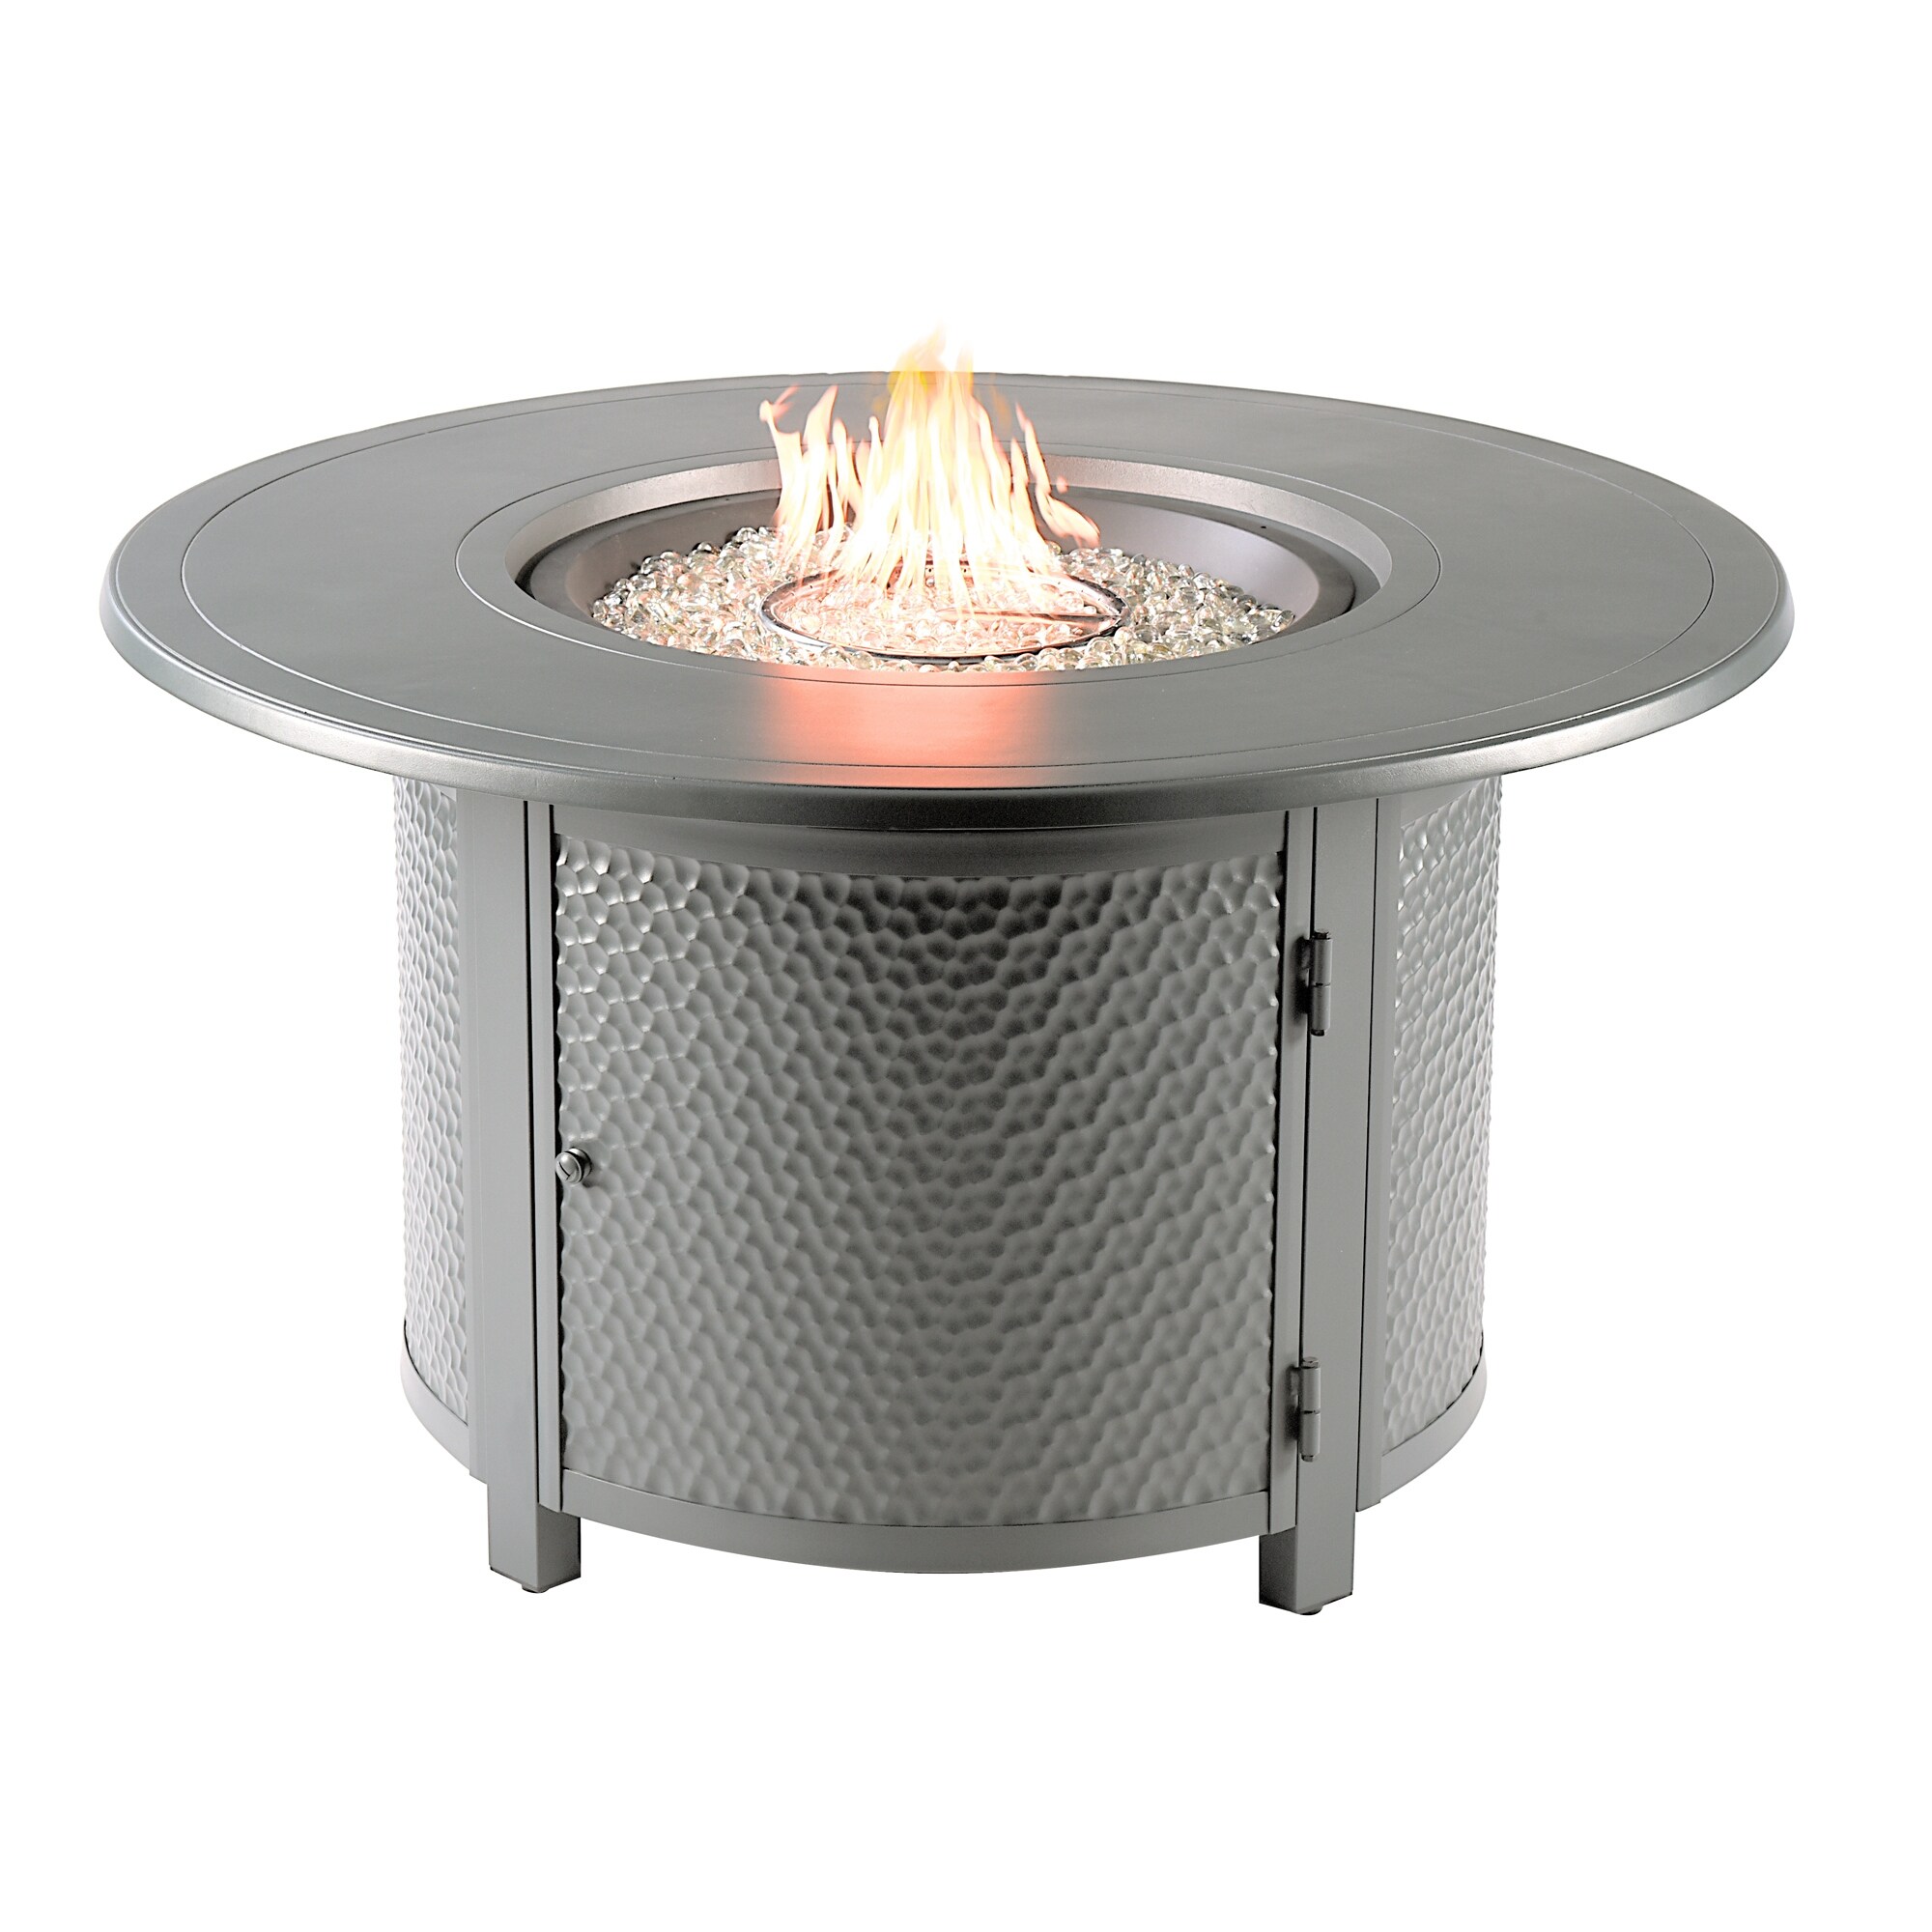 Oakland Living Round 44 in. x 44 in. Aluminum Propane Fire Pit Table with Glass Beads, Two Covers, Lid, 55,000 BTUs - N/A